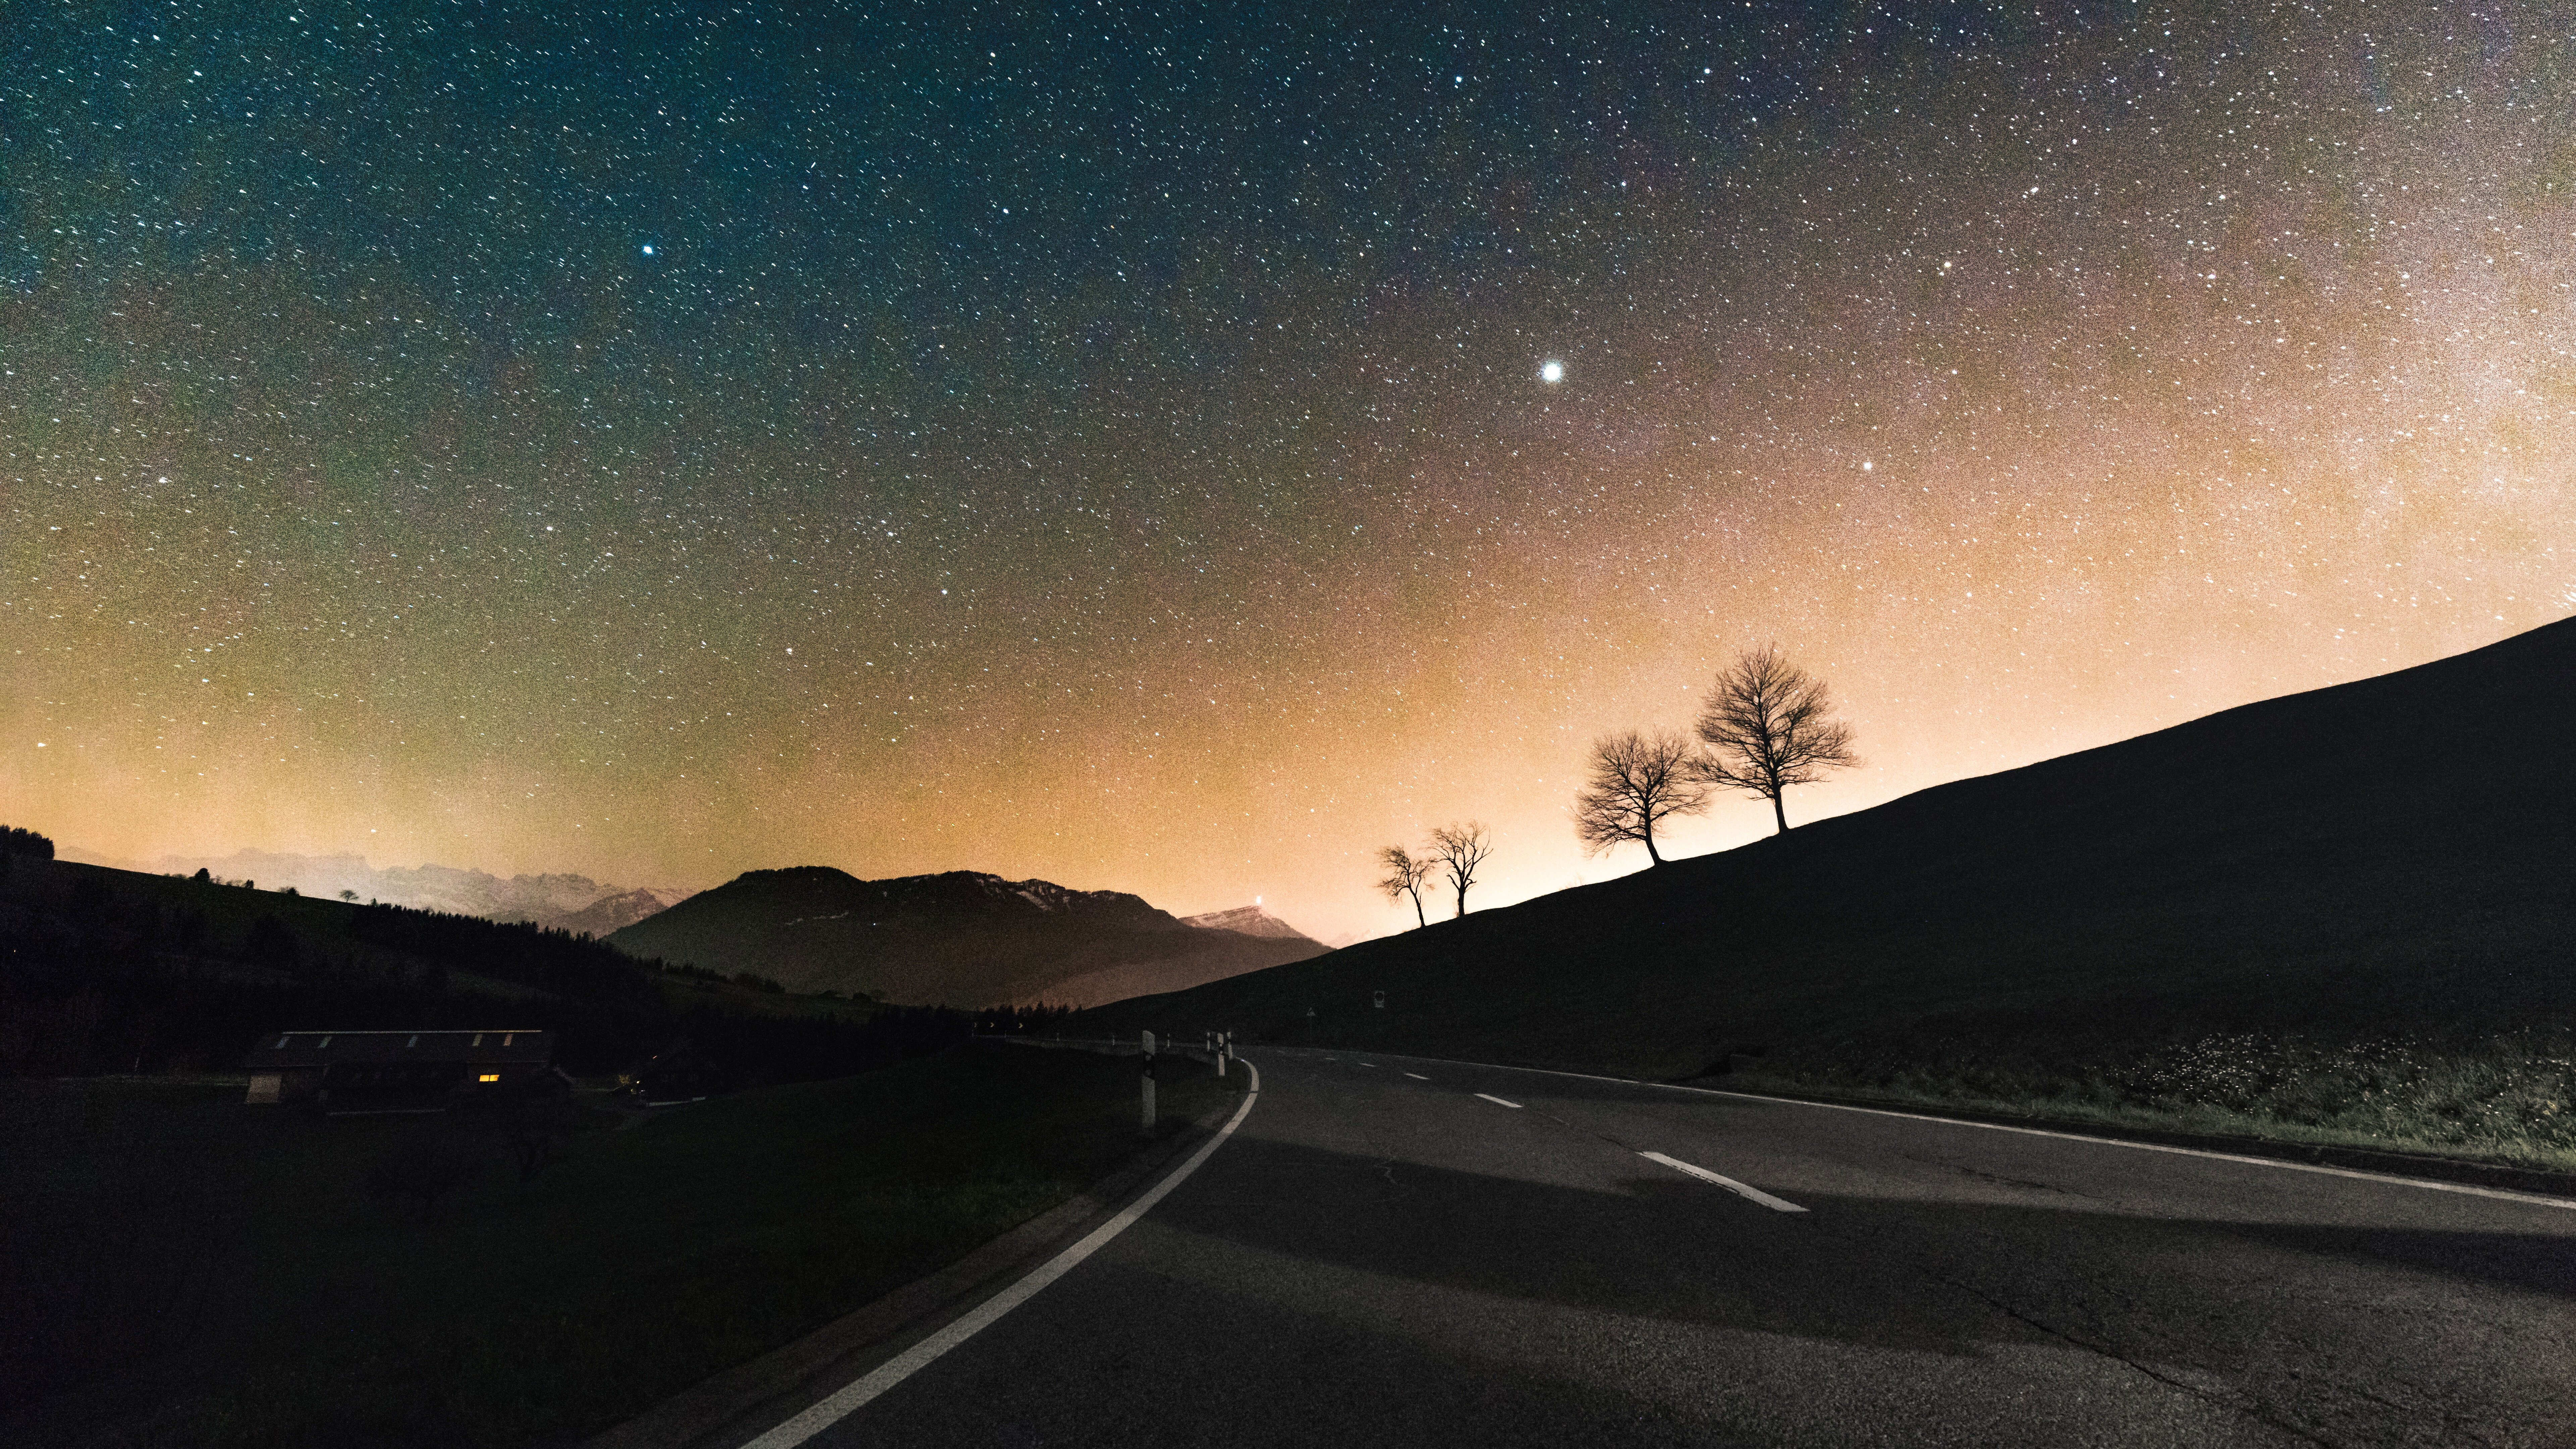 7680x4320 Sky Full Of Stars Road 8k 8k HD 4k Wallpapers, Image, Backgrounds, Photos and Pictures